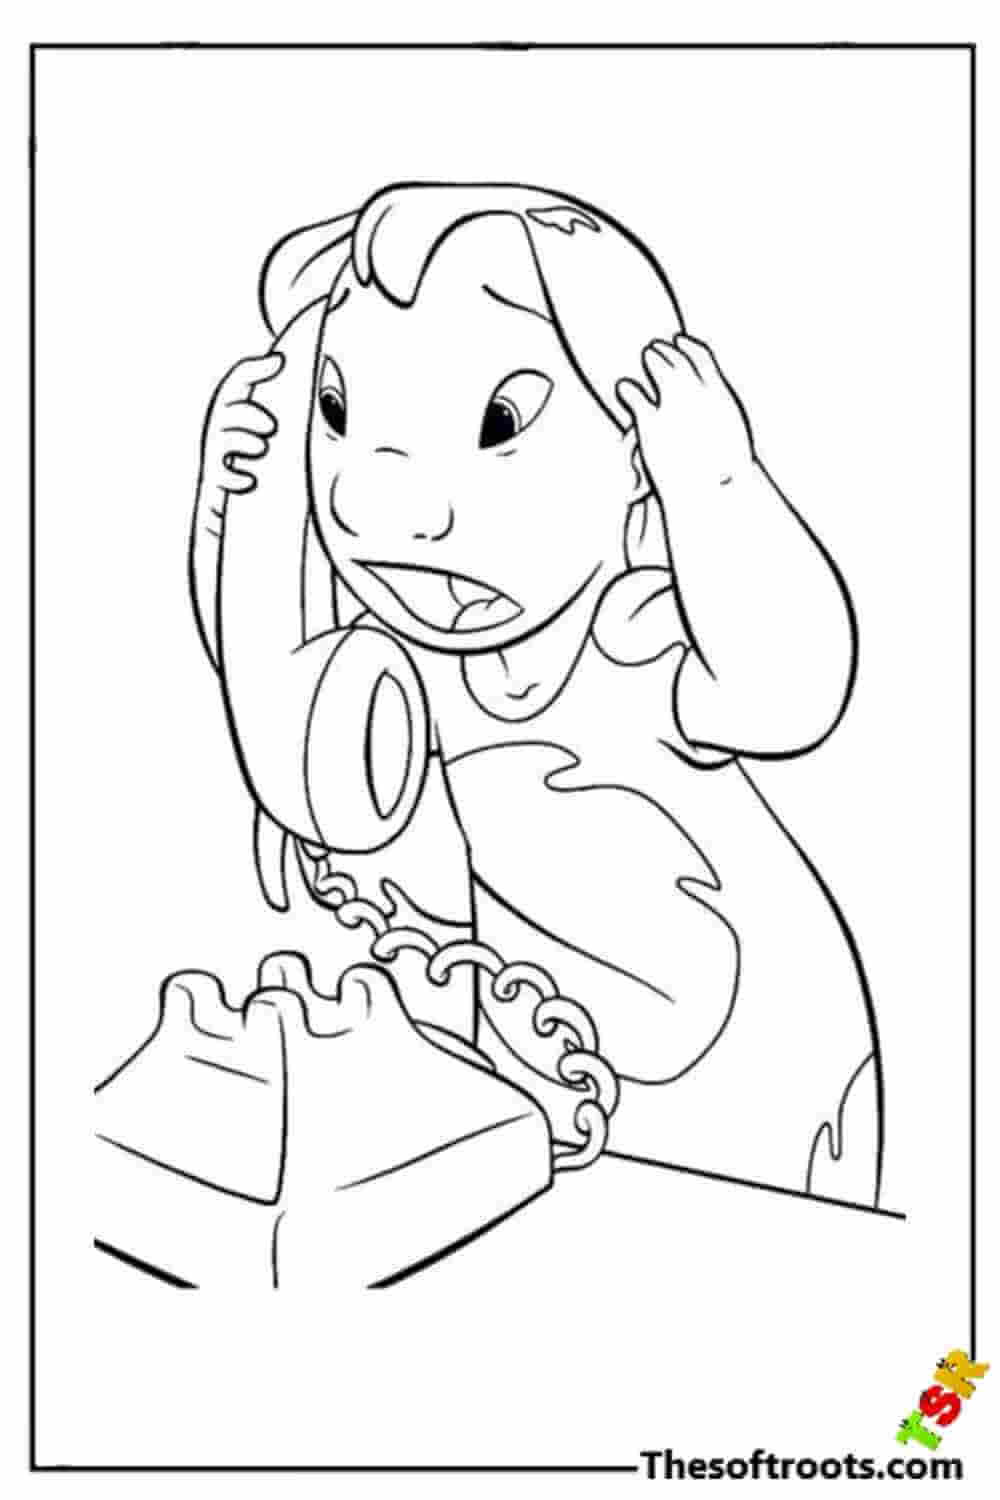 Lilo is Shocked coloring pages